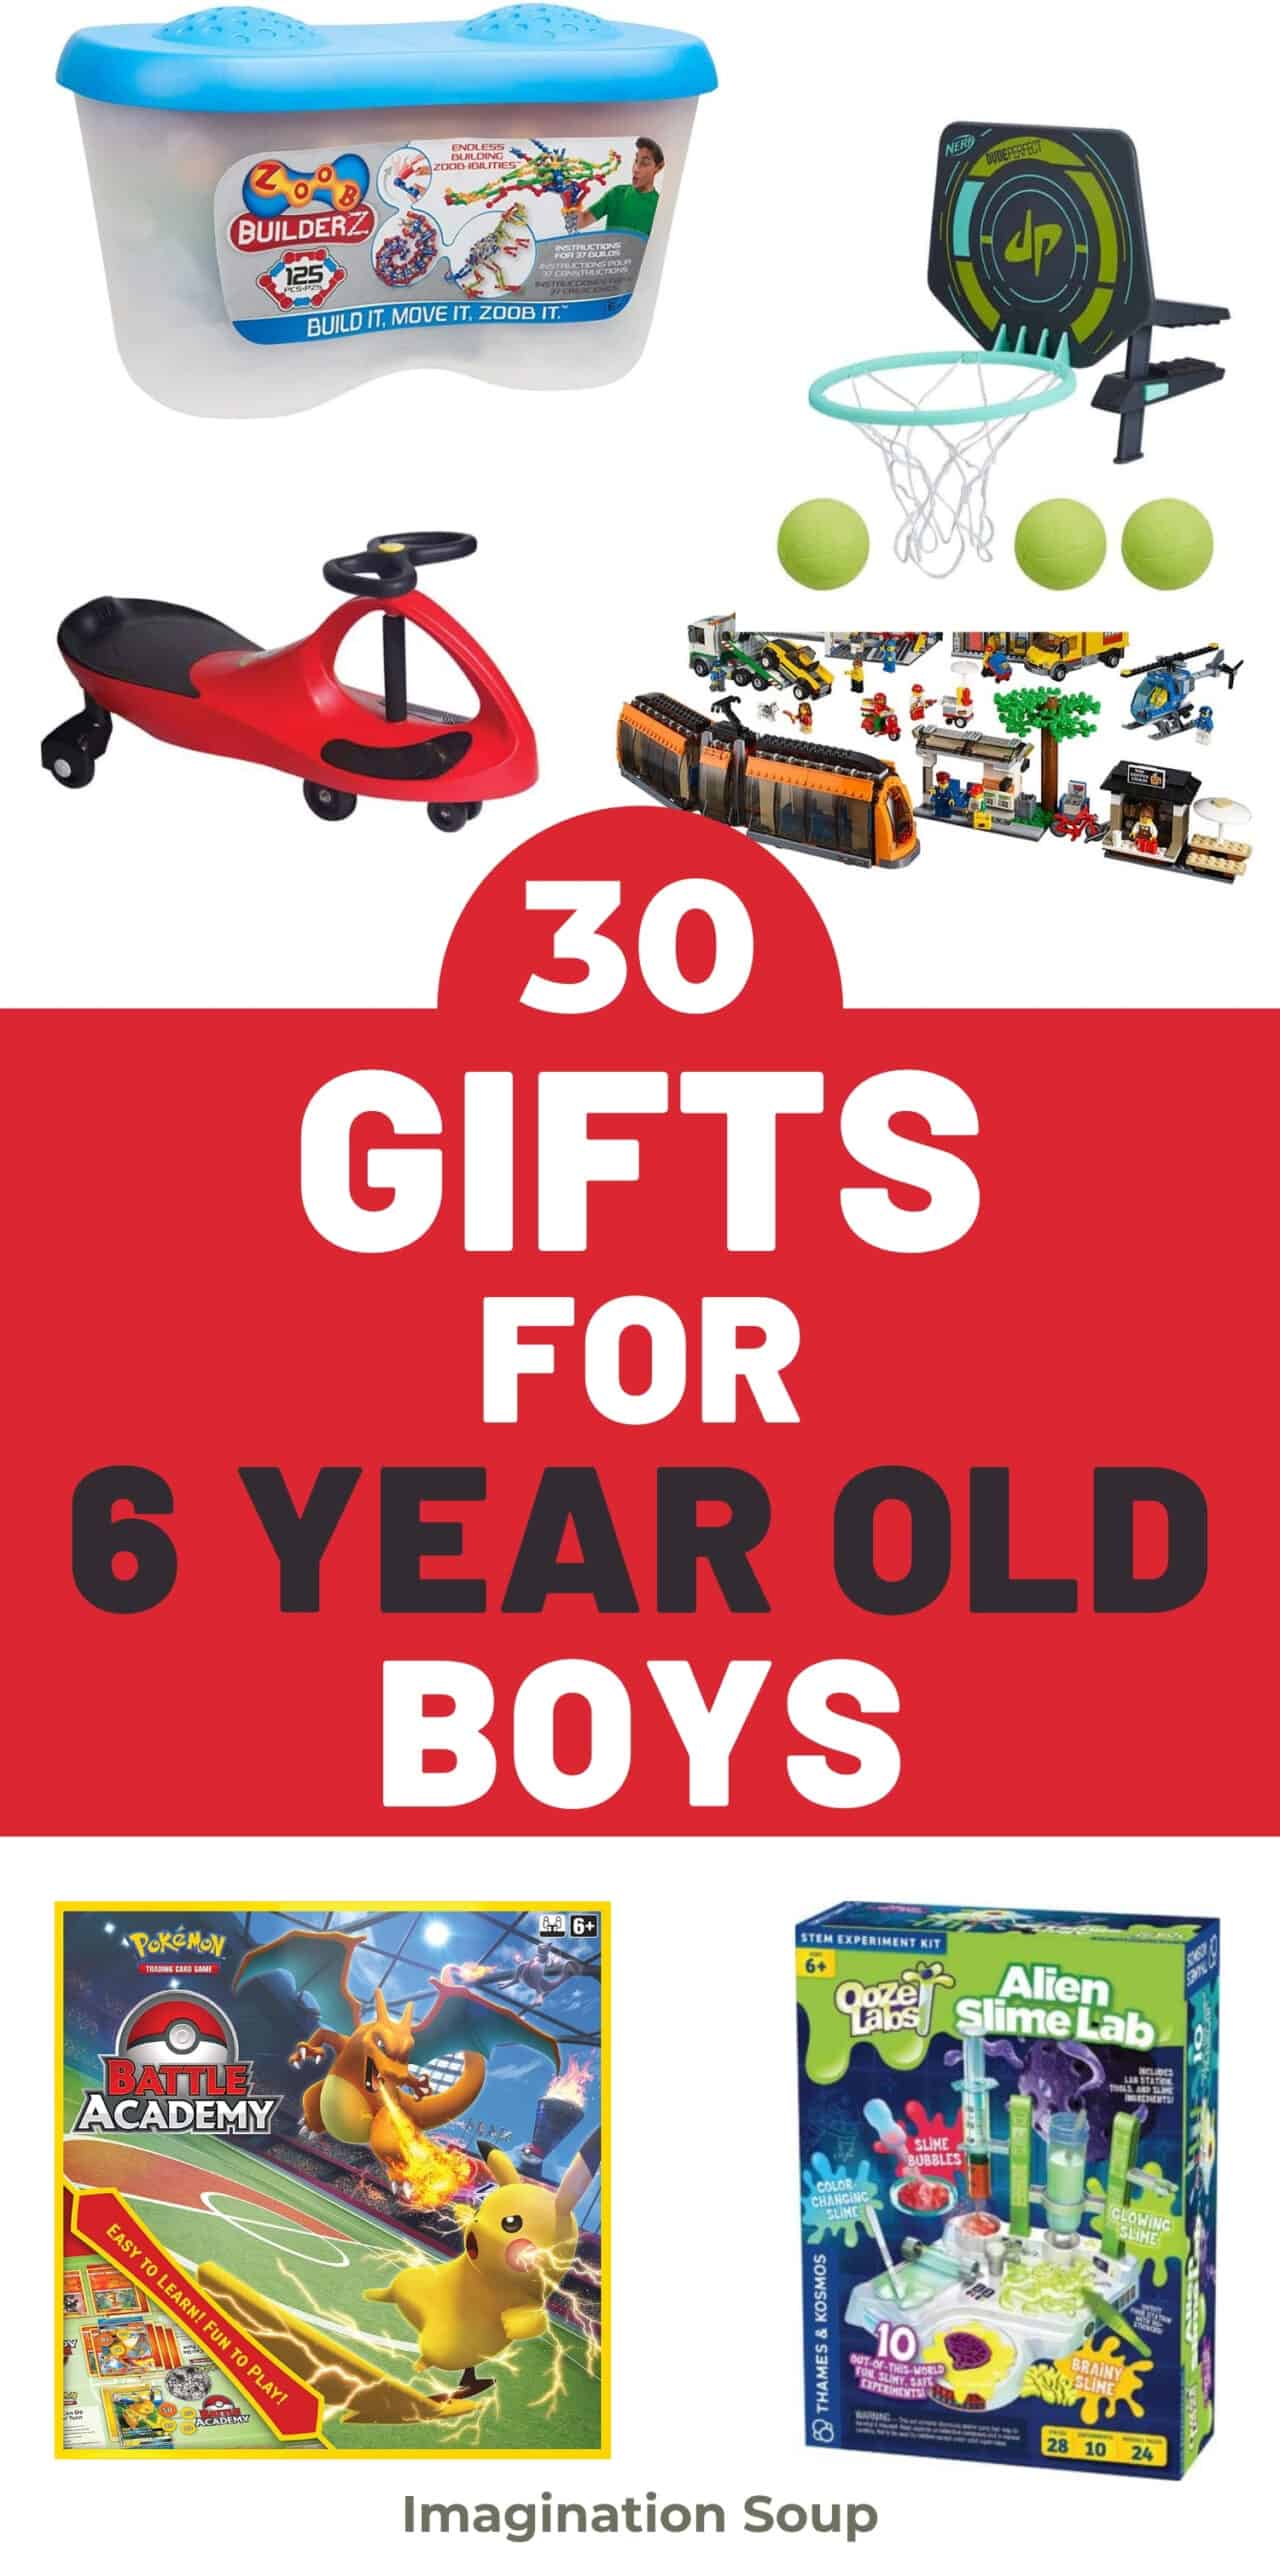 TOYS AND GIFTS FOR 6 YEAR OLD BOYS